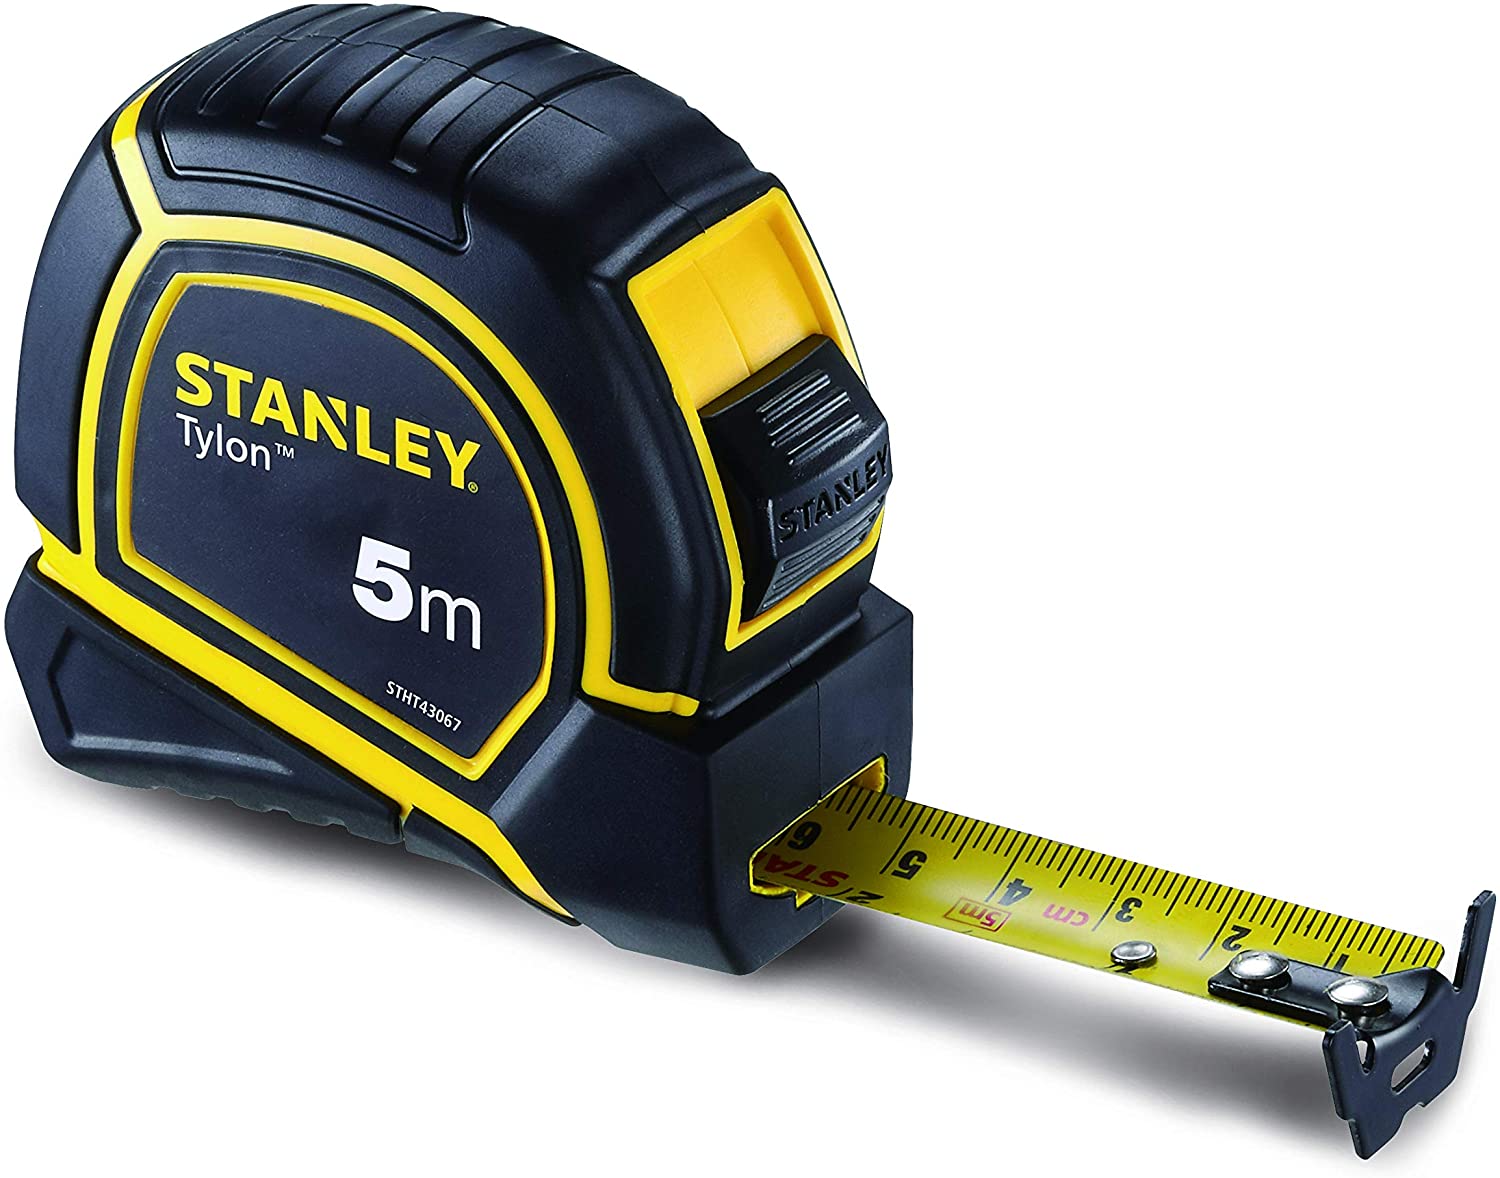 STANLEY STHT43067-12 Tylon 5 Meters Measurement Tape in Rugged Rubber Case